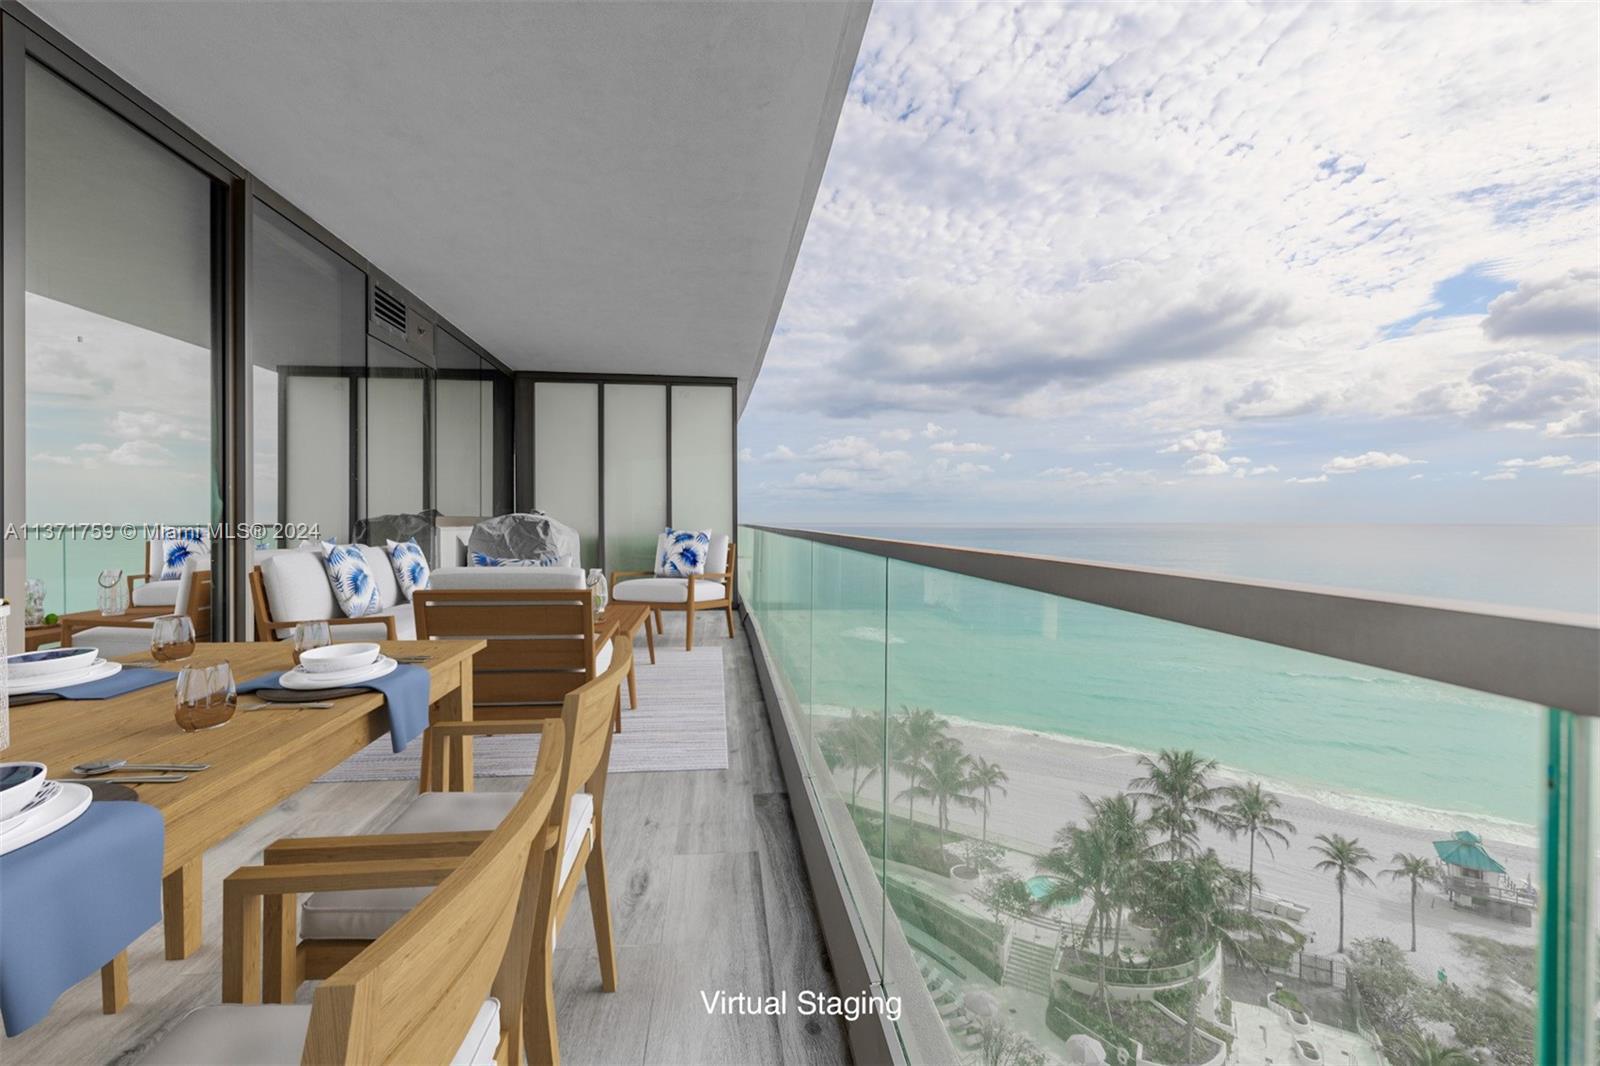 Beautiful 2BR/2.5BA unit at Armani Casa Residences offers oceanfront and intracoastal views. Spaciou